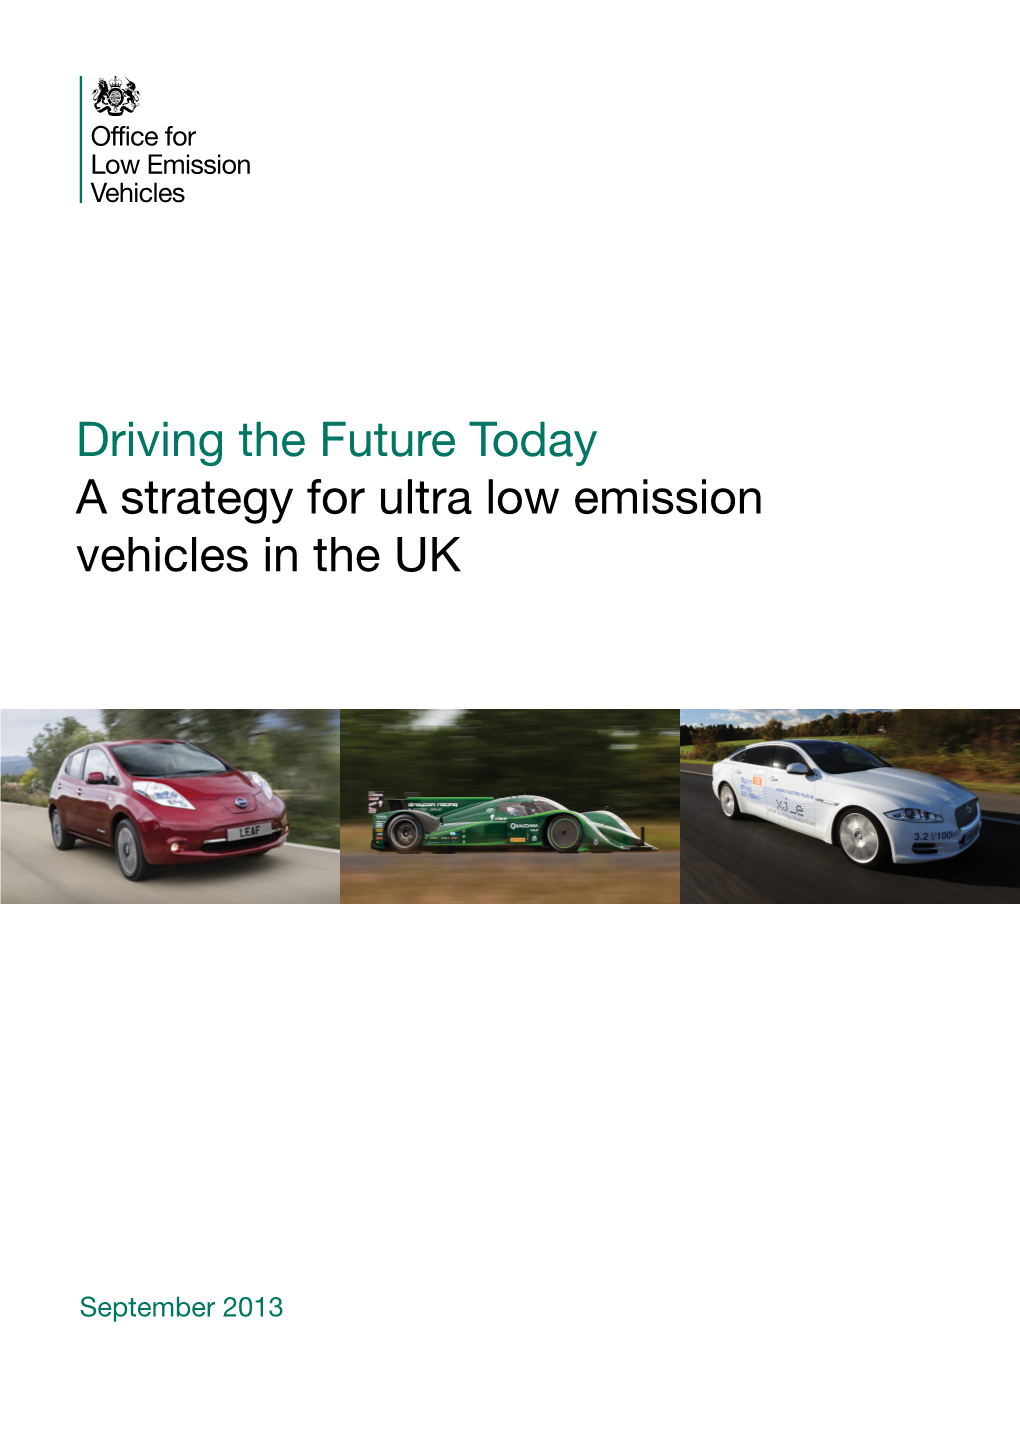 A Strategy for Ultra Low Emission Vehicles in the UK